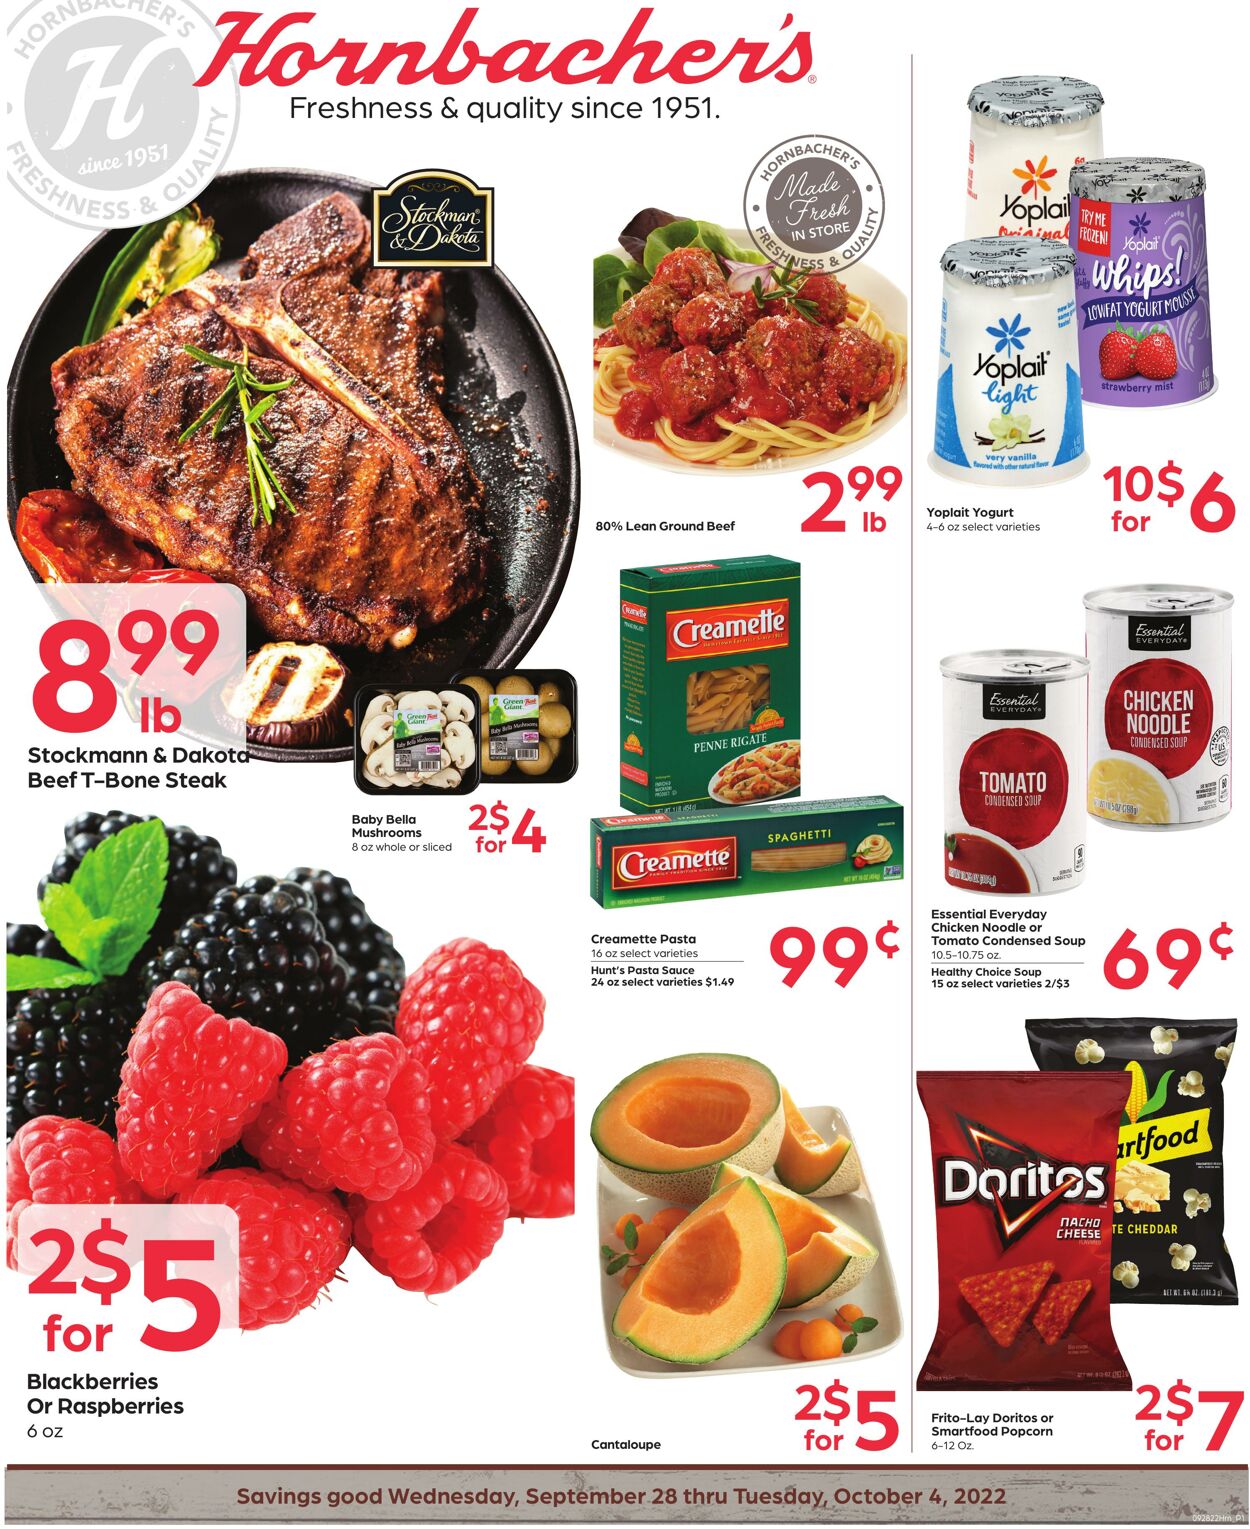 Hornbacher's Promotional weekly ads